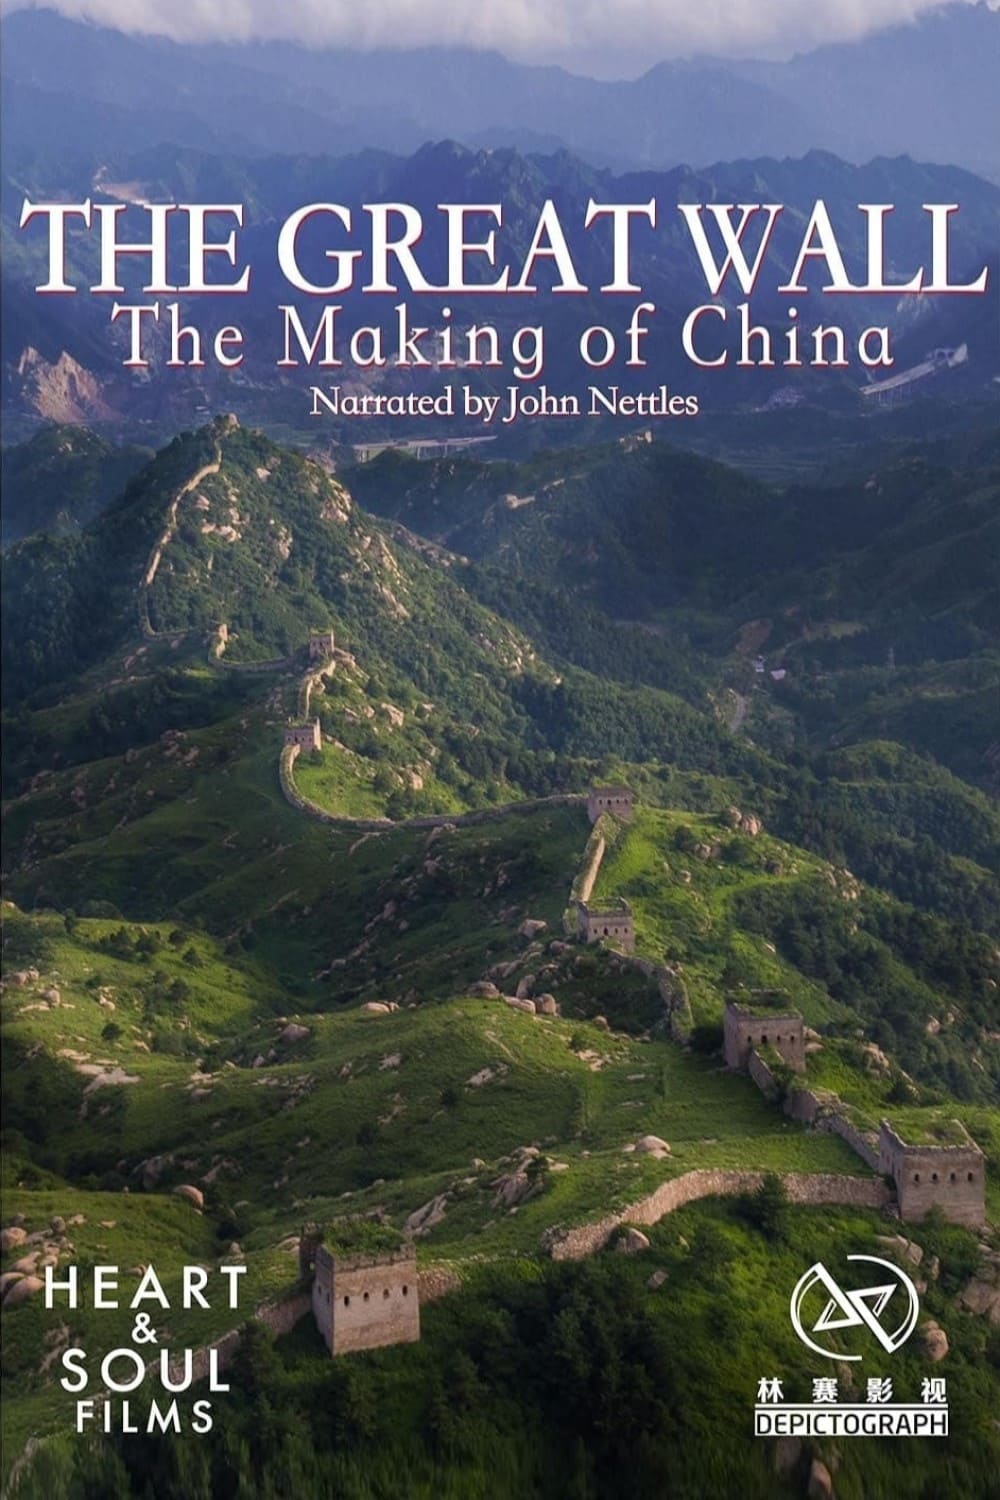 The Great Wall: The Making of China